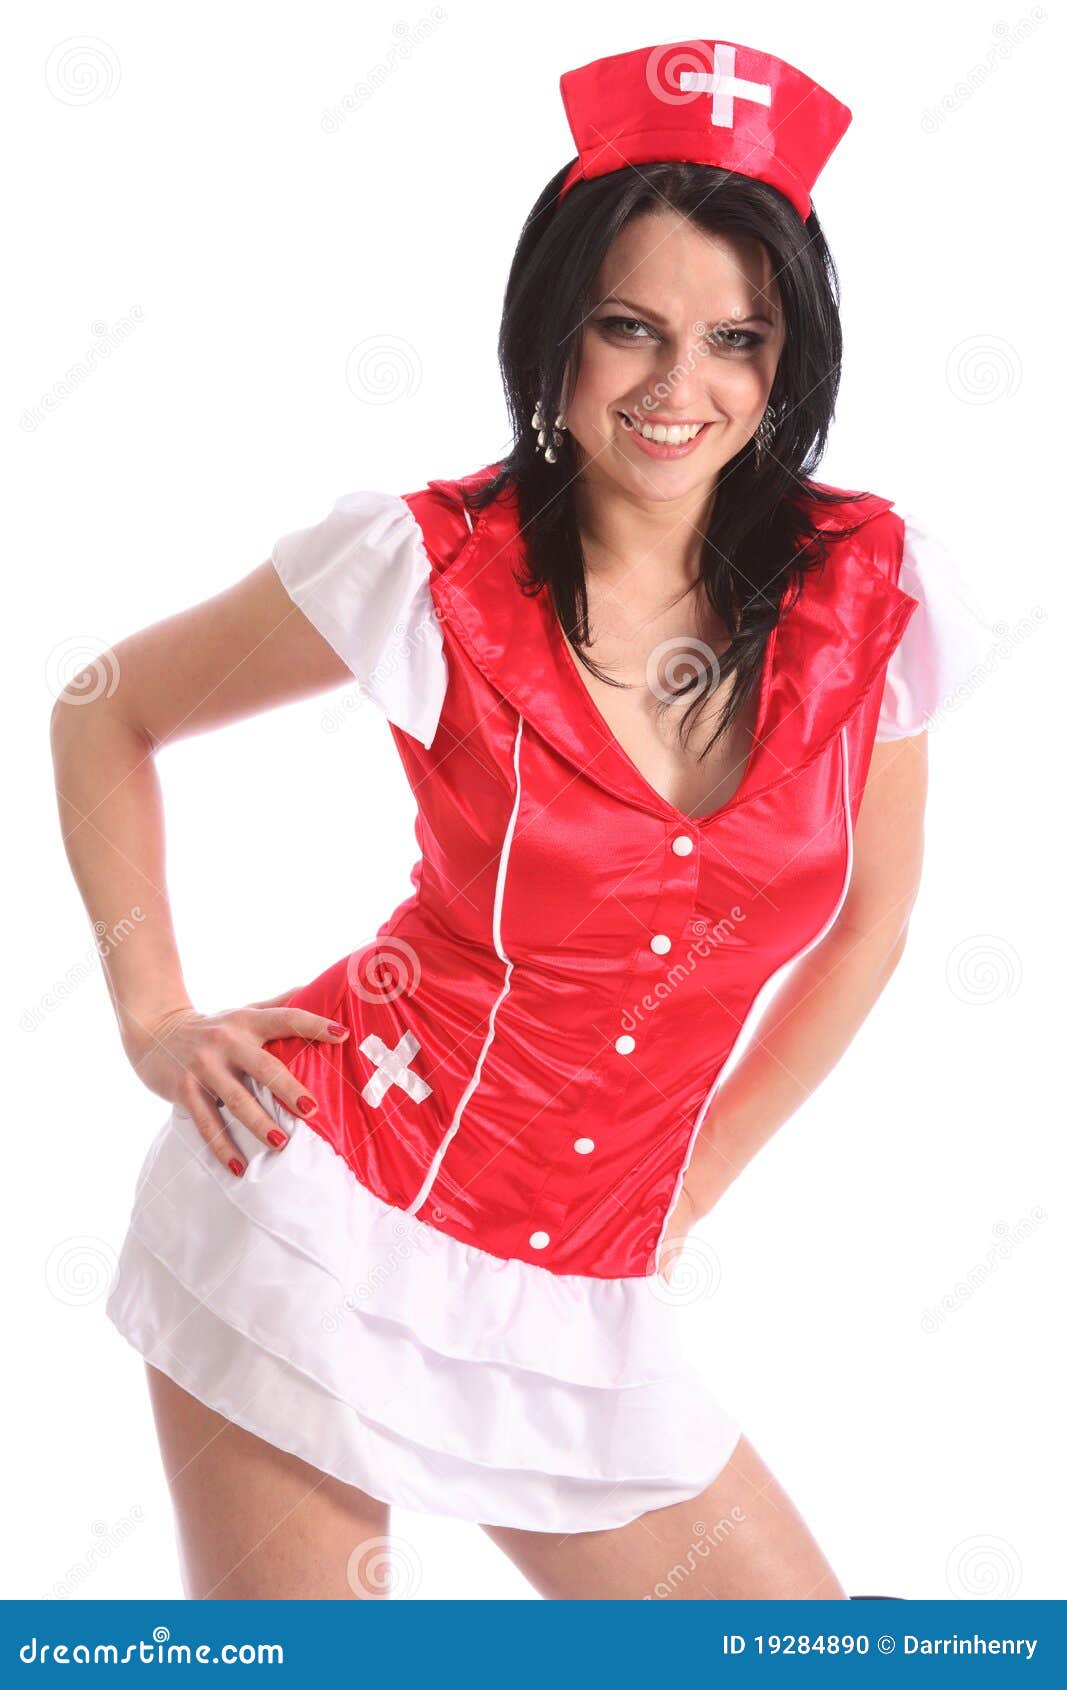 Young Woman in Red Fancy Dress Nurse Costume Stock - Image of cheerful, skirt: 19284890